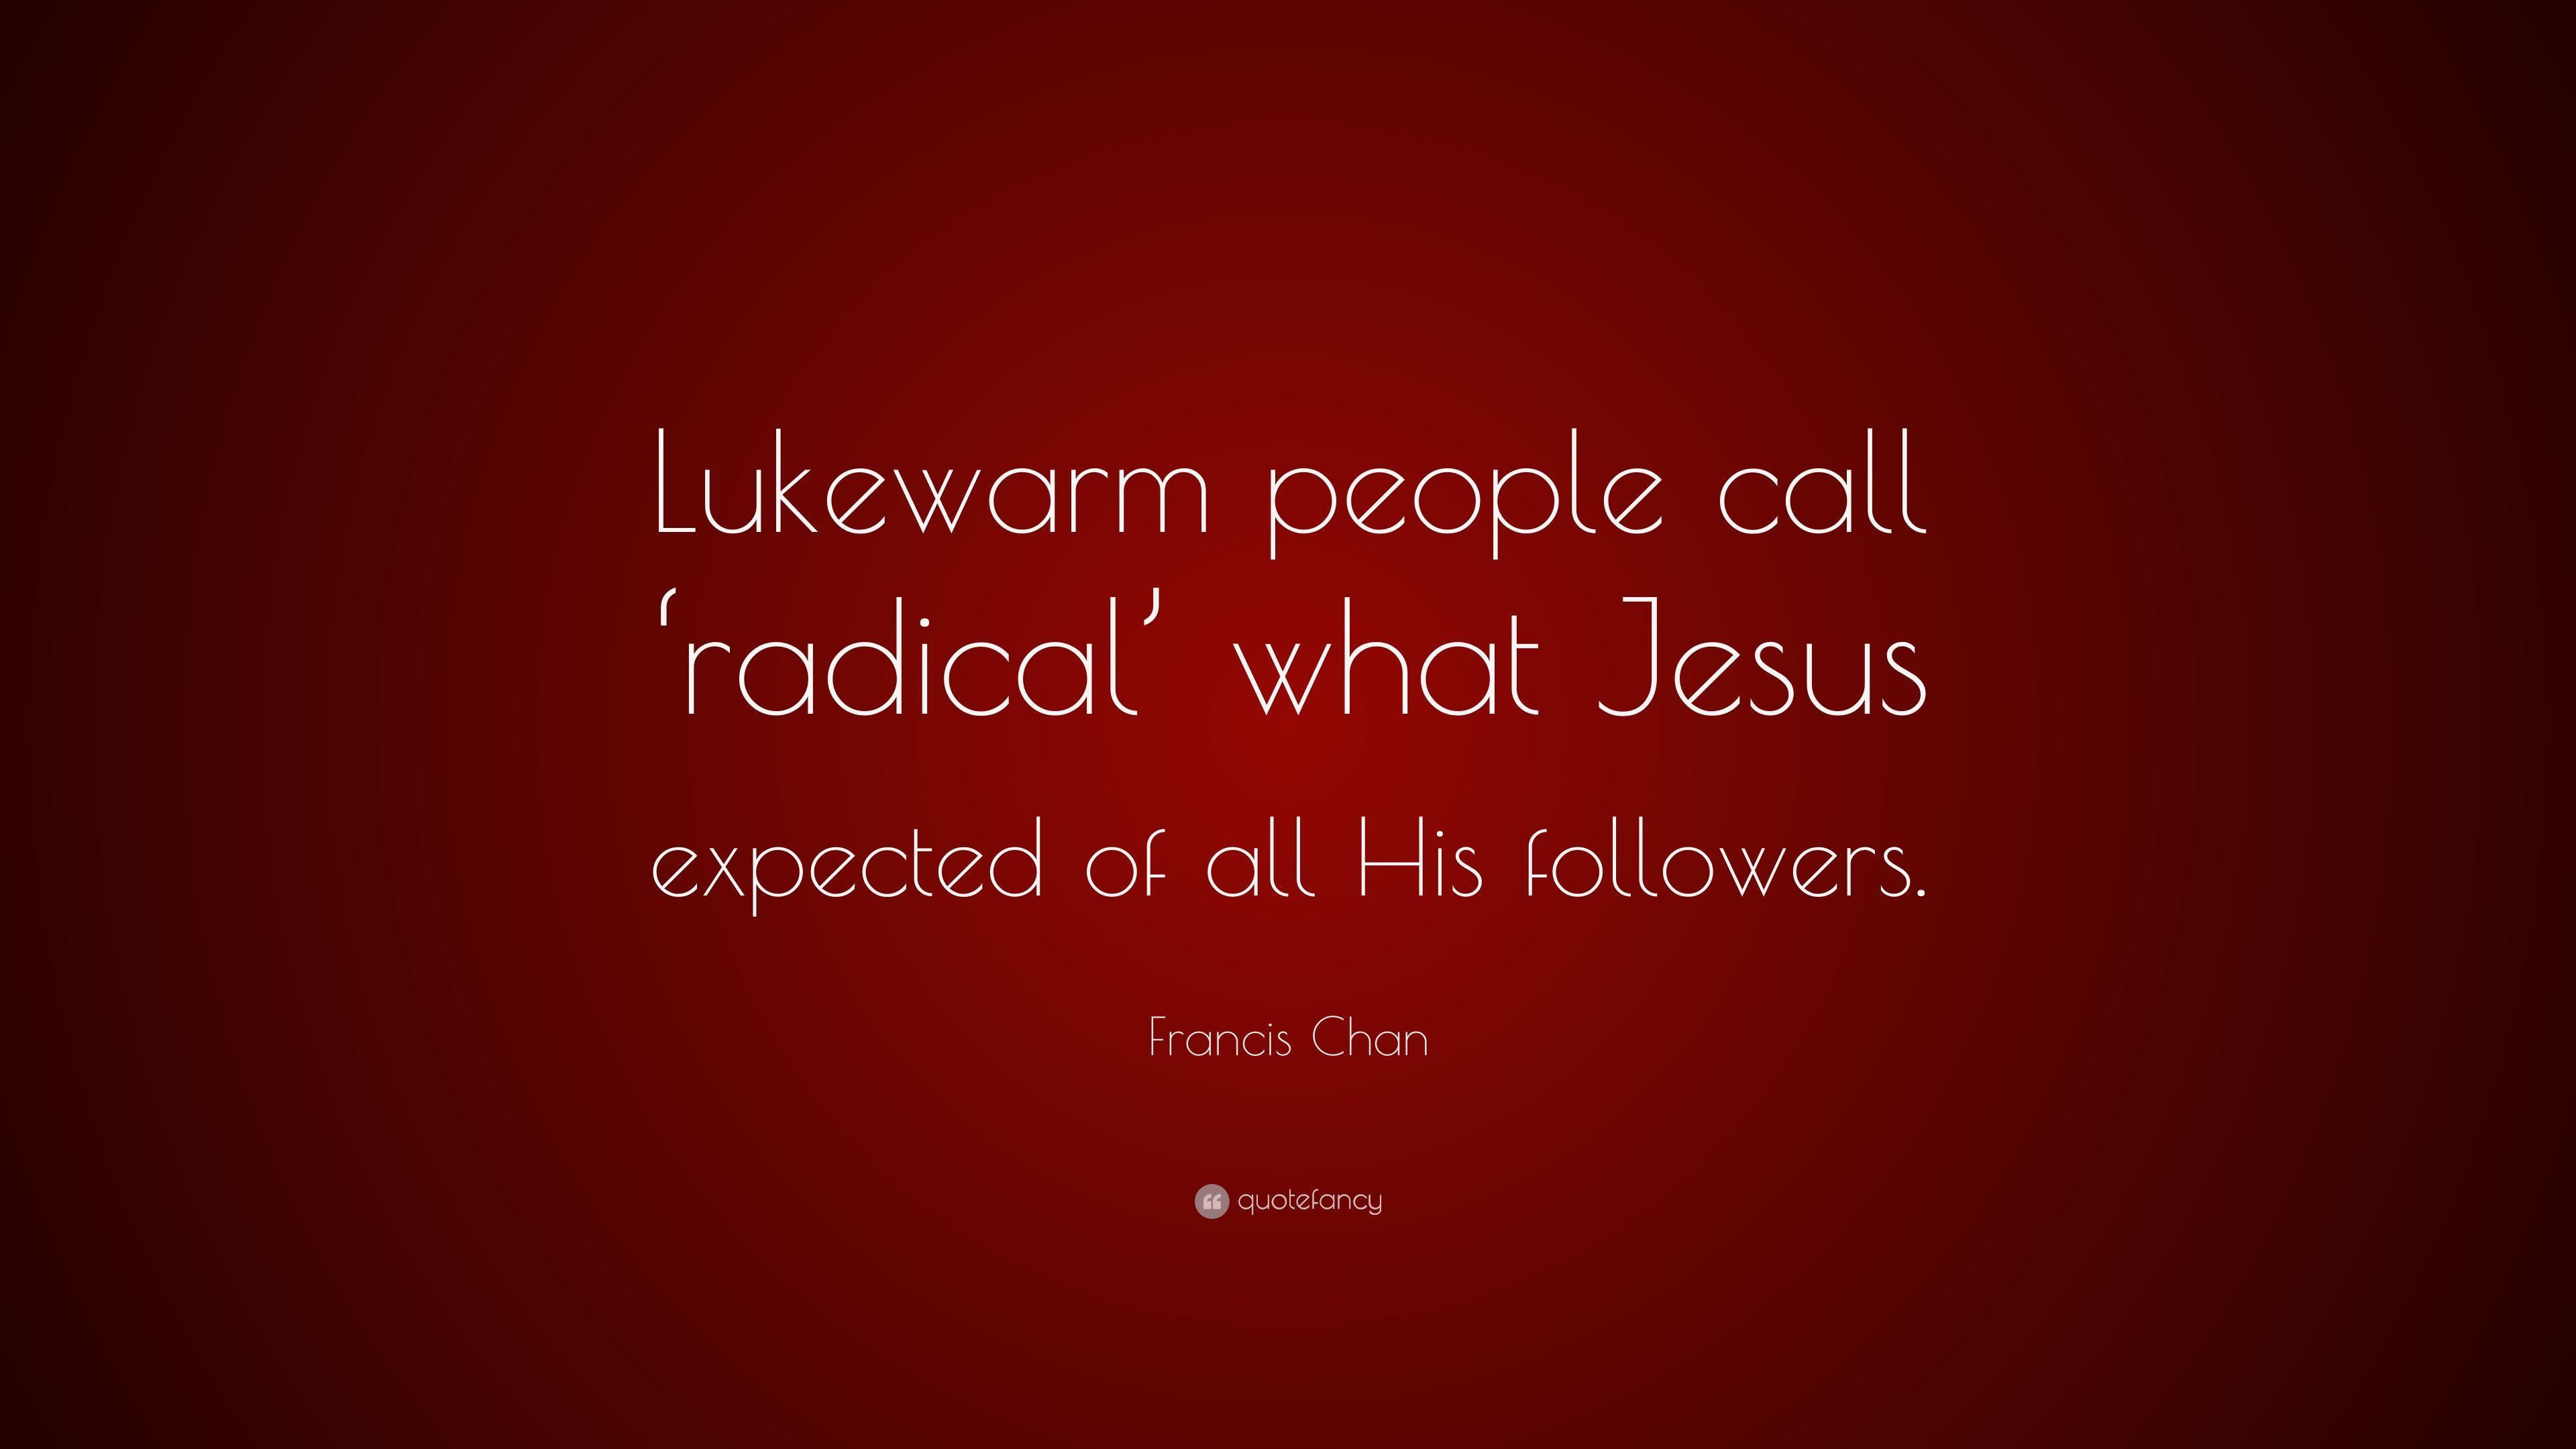 Francis Chan Quote: “Lukewarm people call 'radical' what Jesus